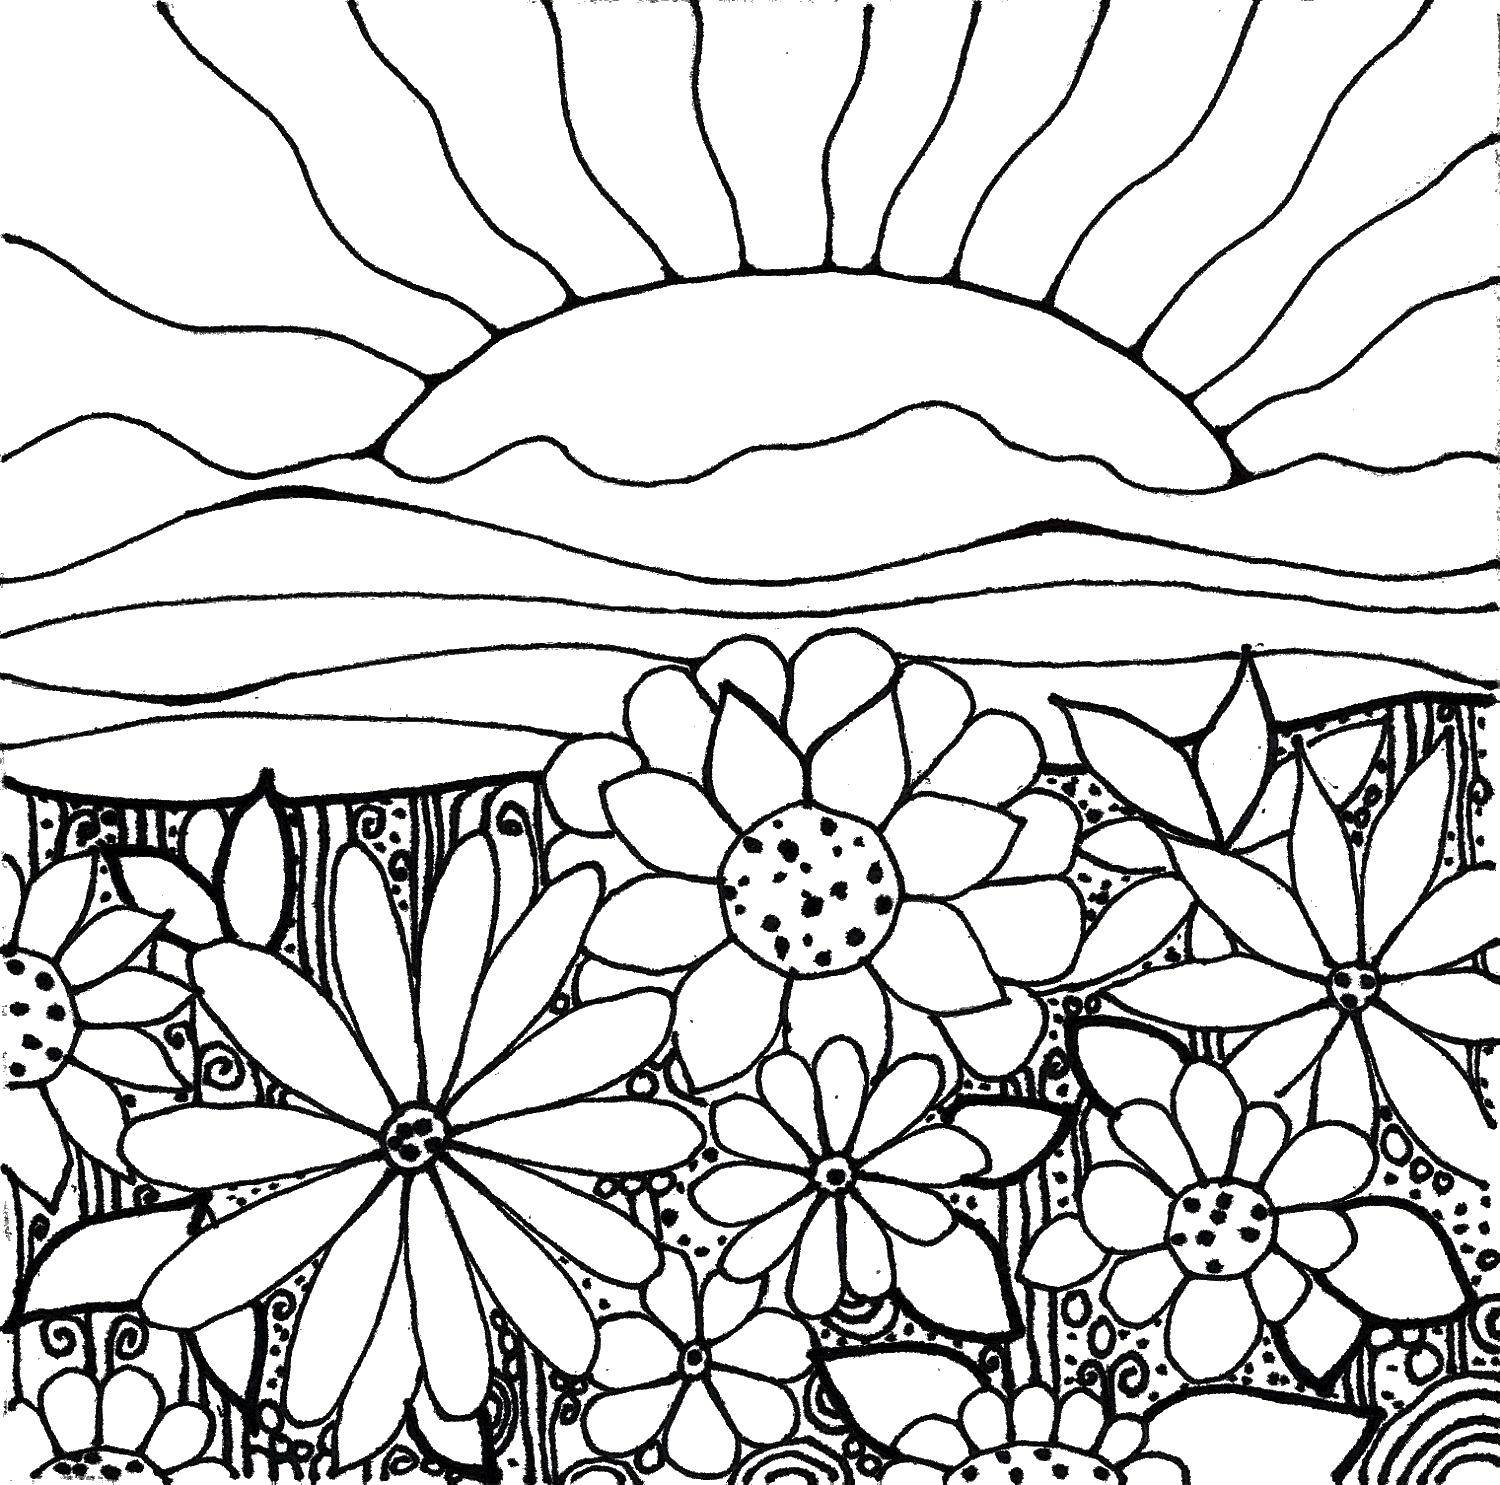 Coloring Sunrise over flowers. Category coloring. Tags:  Sun, rays, joy.